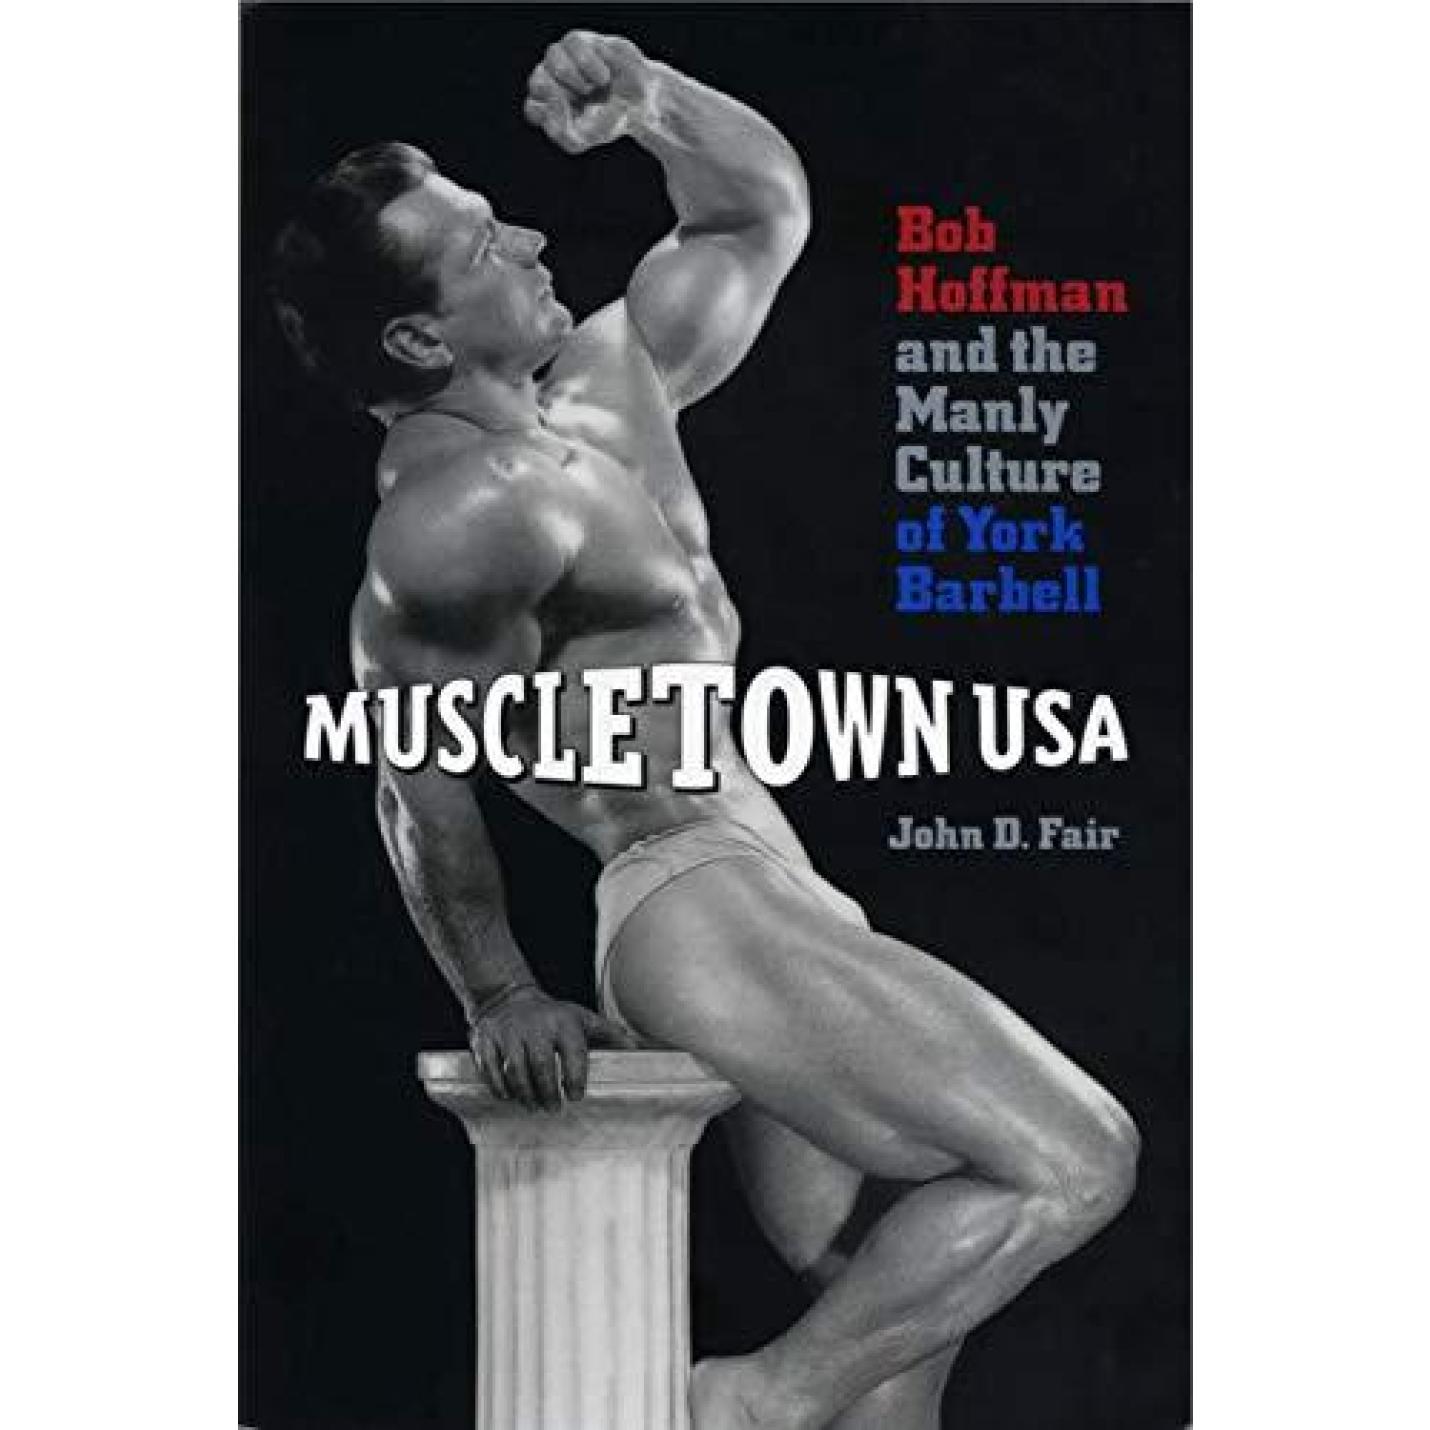 John D Fair: Muscletown USA: Bob Hoffman and the Manly Culture of York Barbell (Engels) (Paperback) Paperback